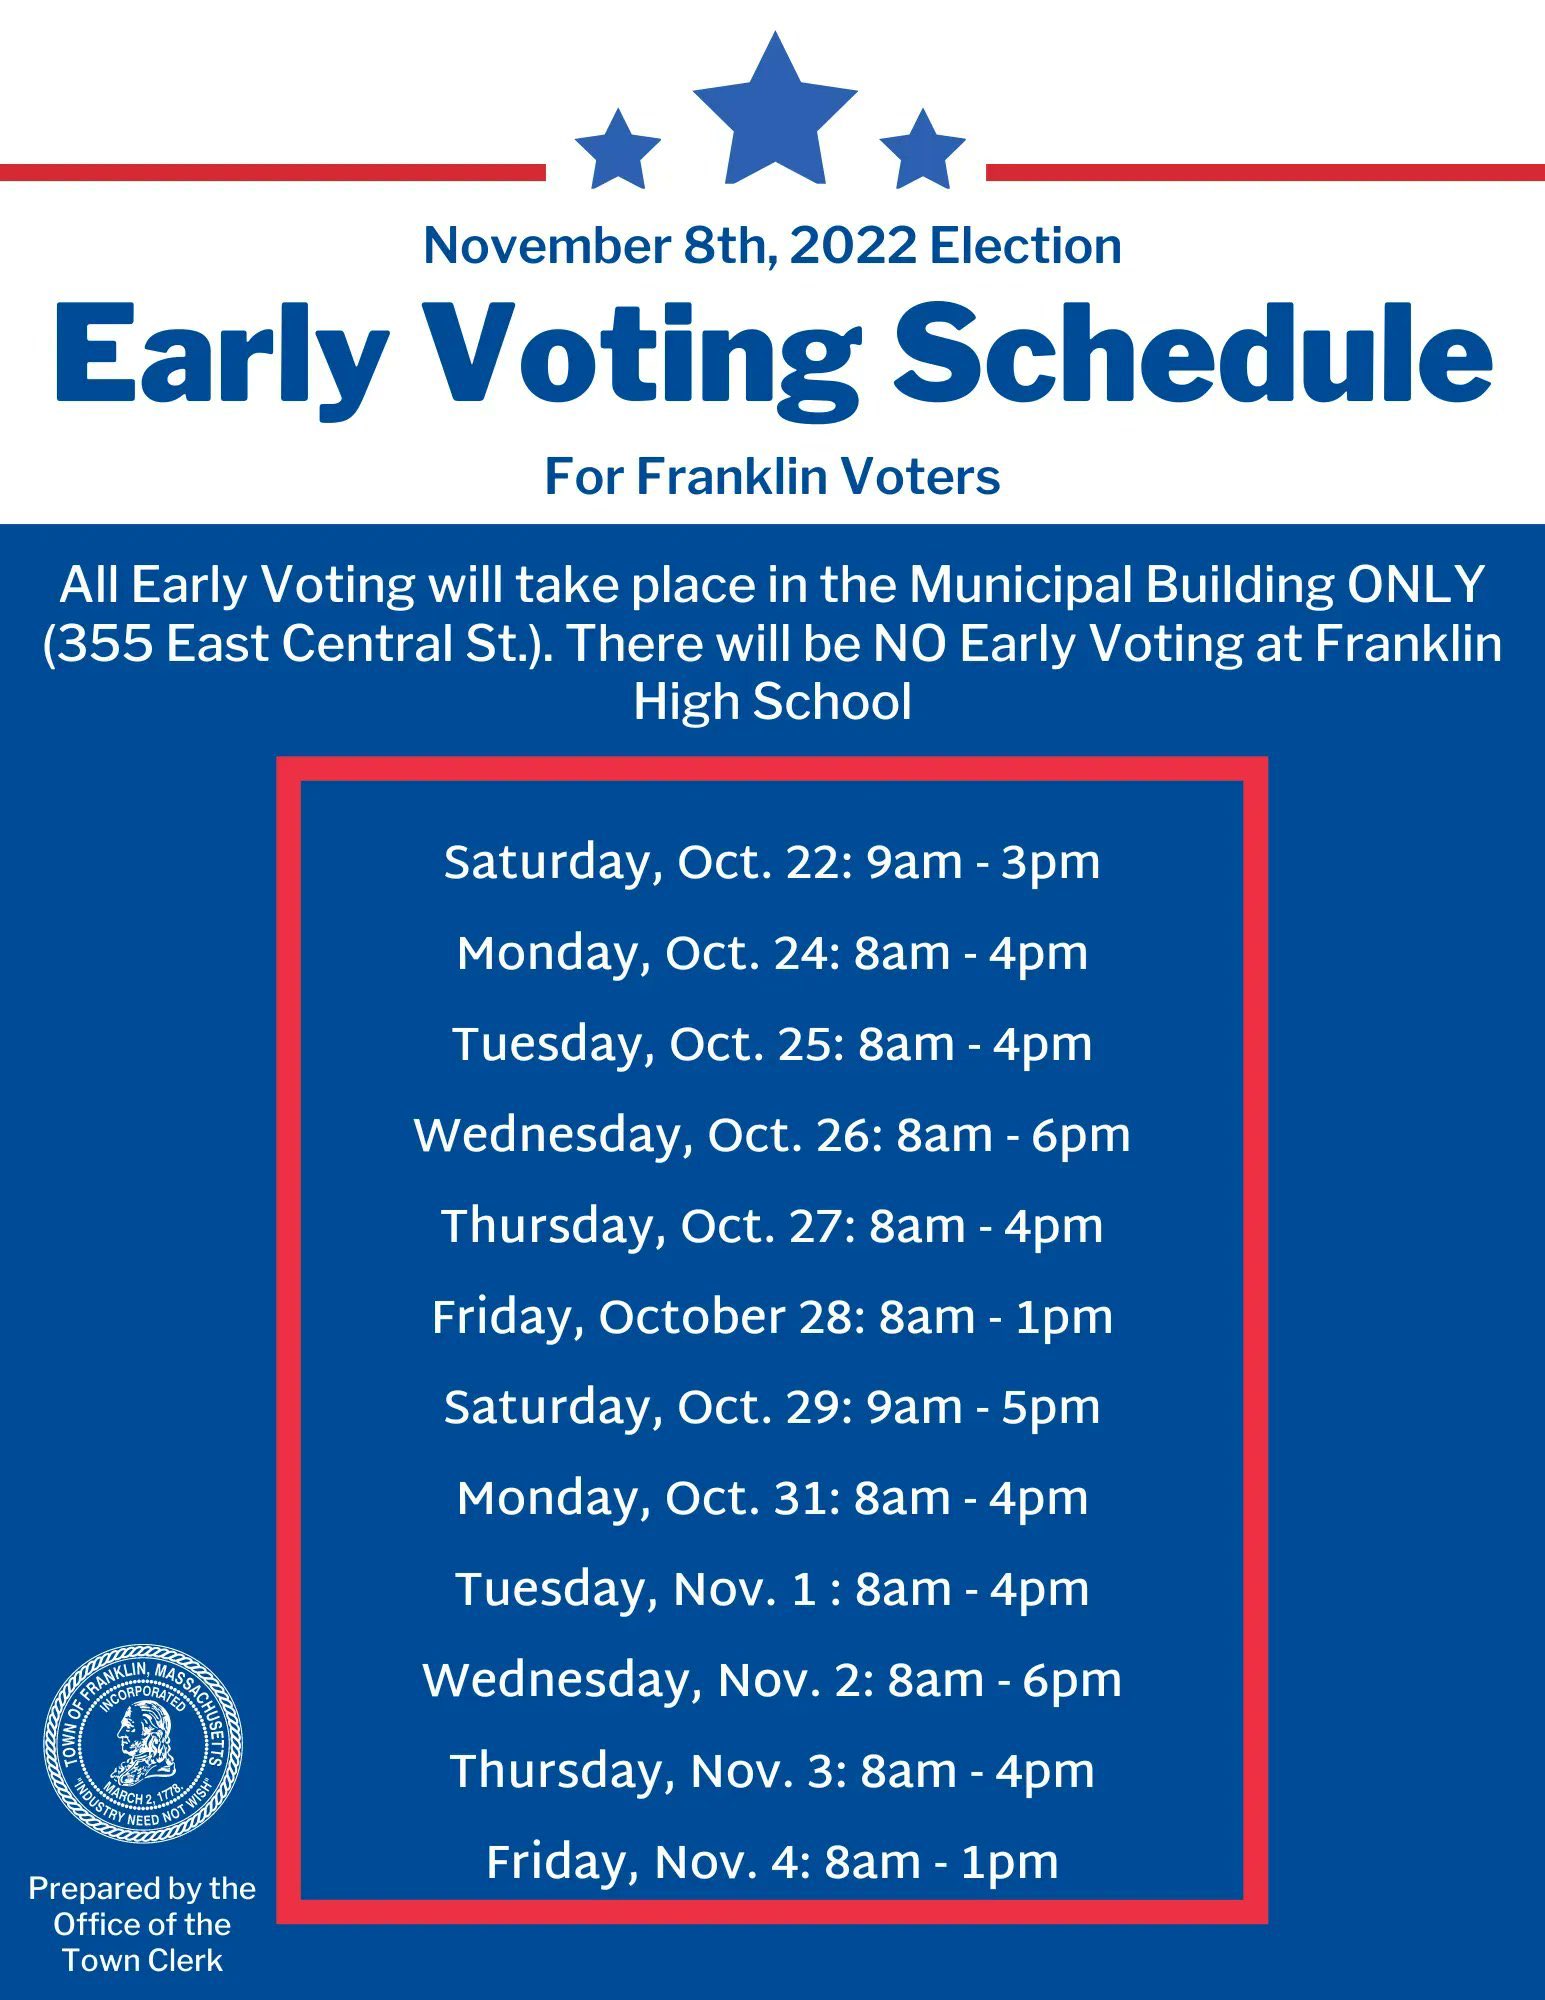 Town of Franklin, MA: Town Clerk reminds of early voting schedule